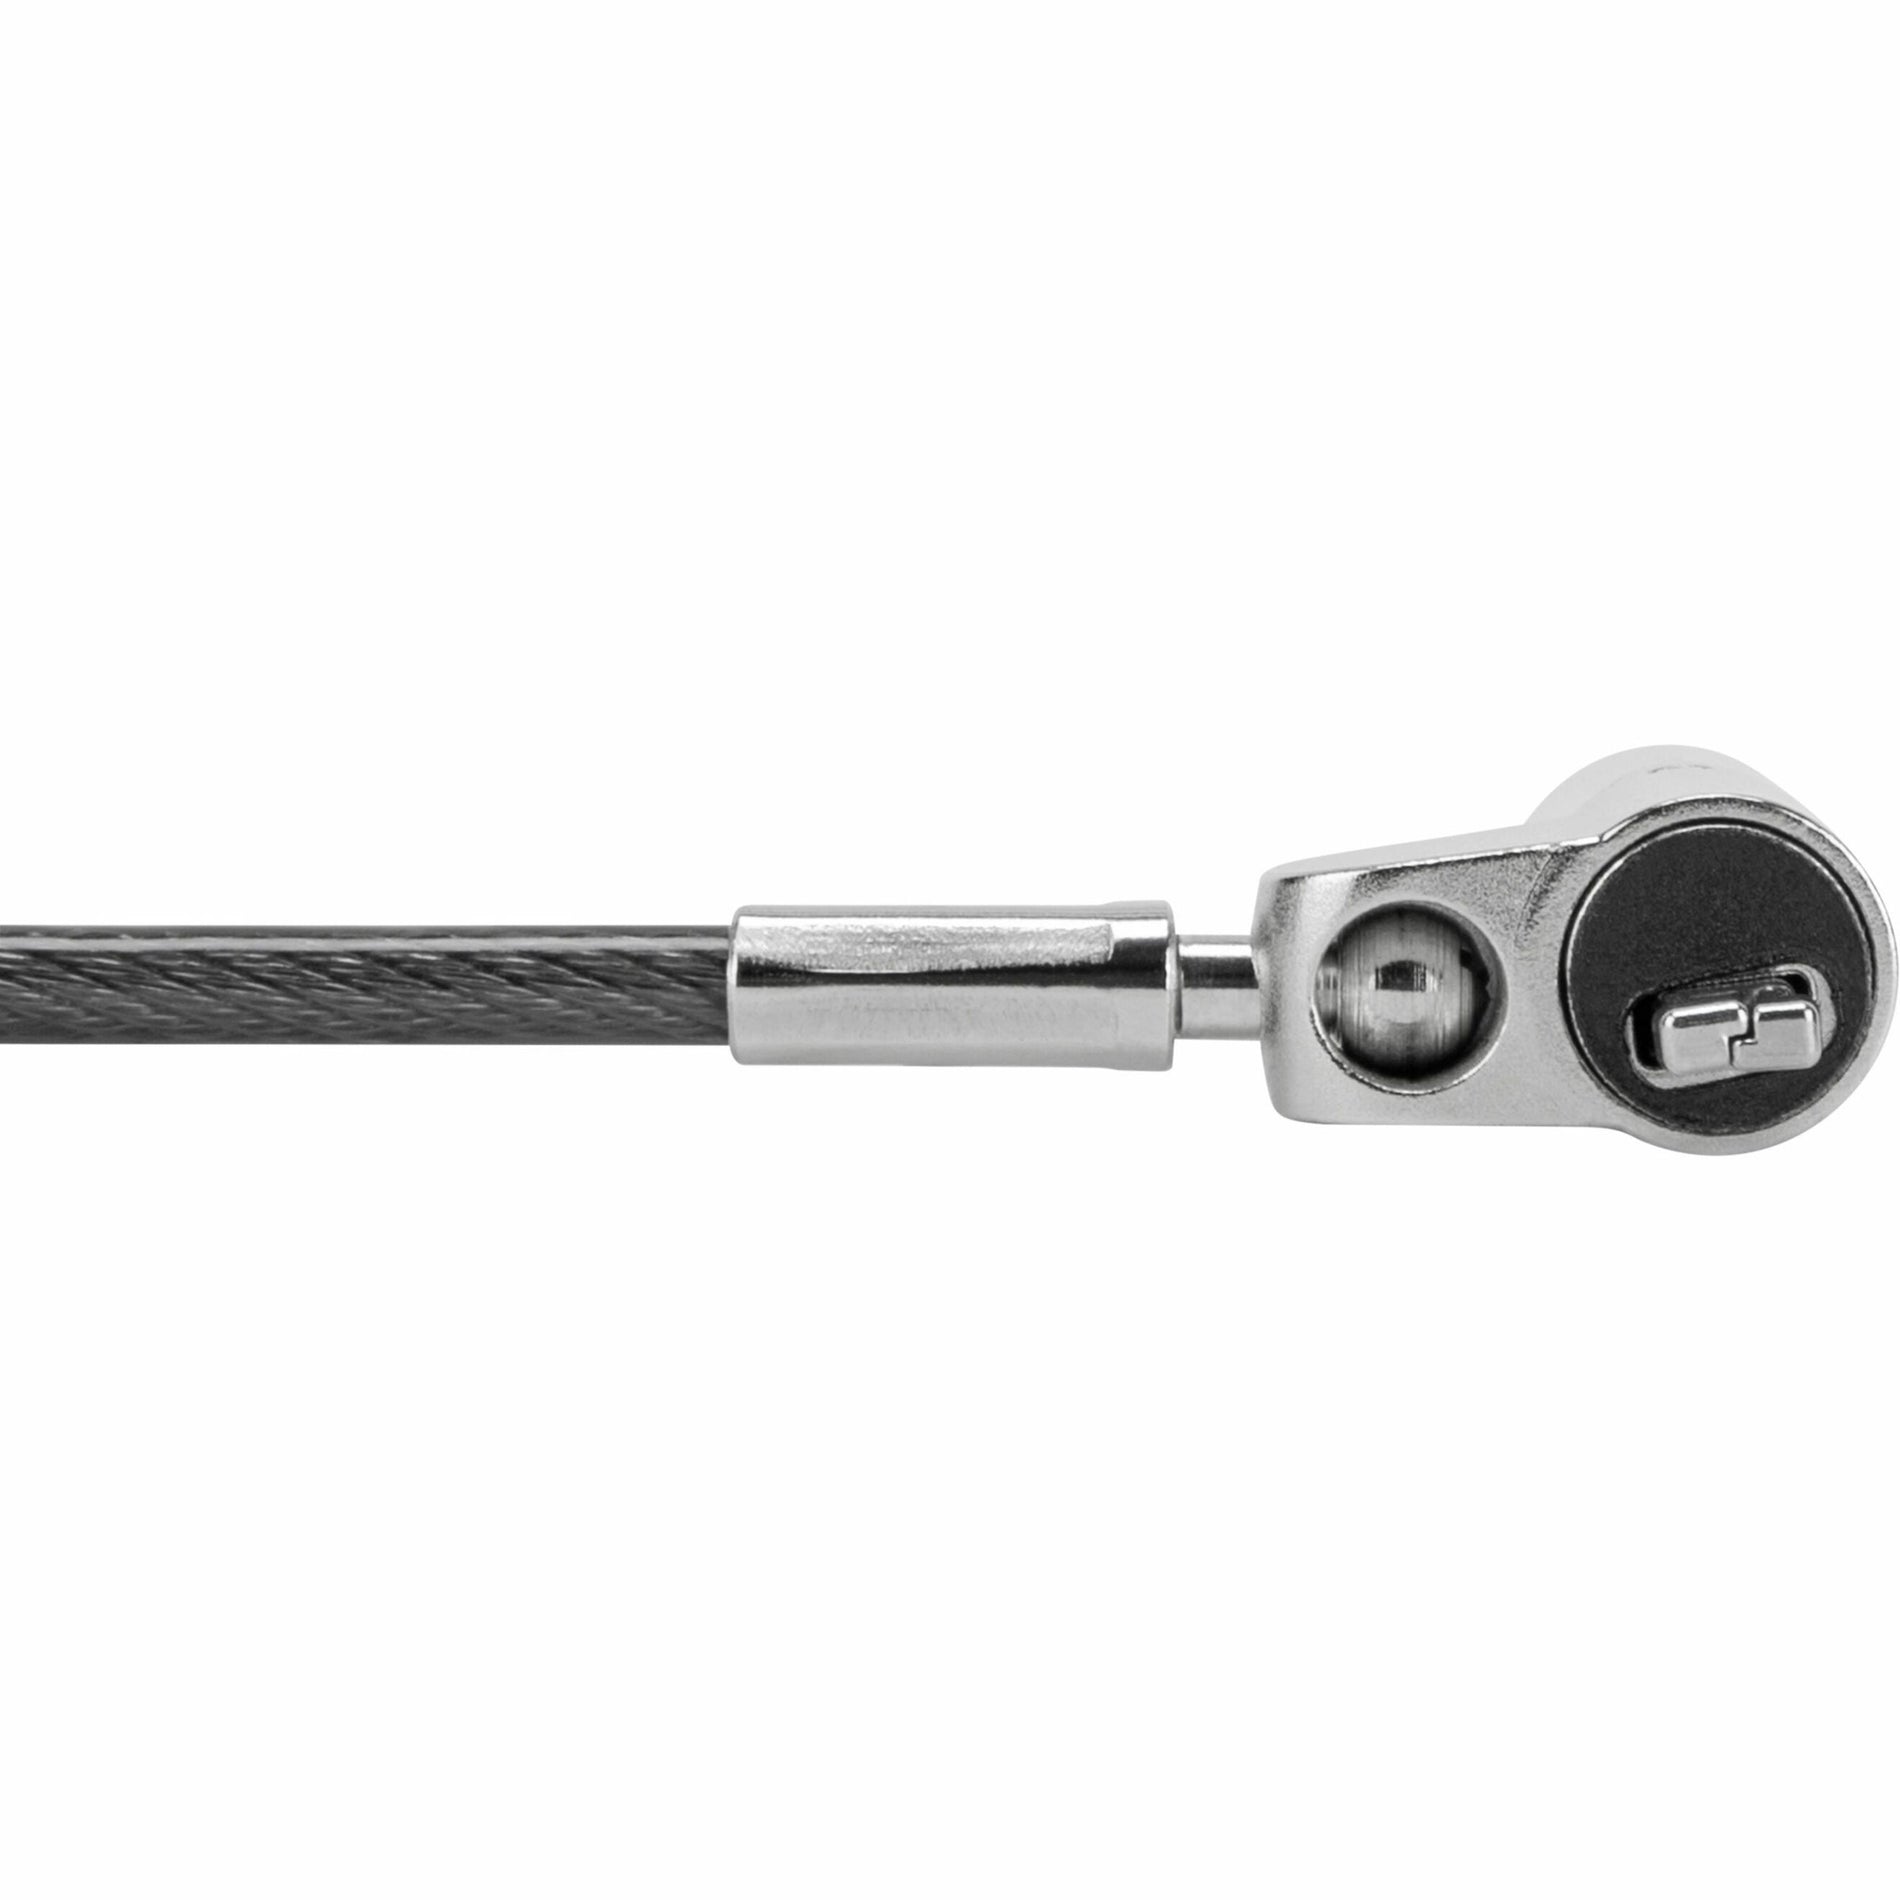 Targus ASP70GLX DEFCON Compact Keyed Cable Lock, 6.50 ft Length, 2 Year Warranty, Notebook Supported